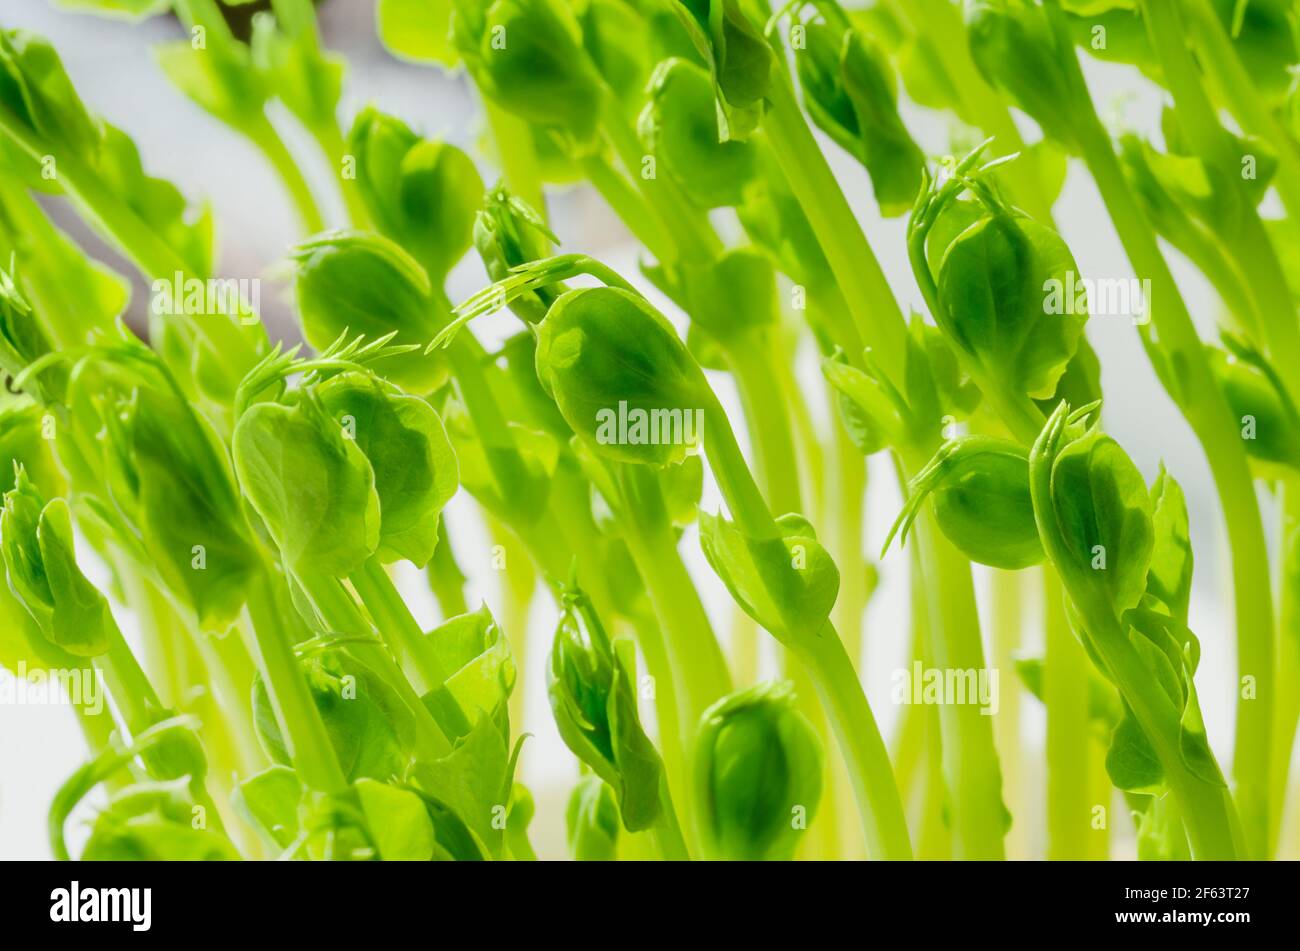 Pea, young plants, front view and close up. Microgreens of Pisum sativum. Green shoots, seedlings and sprouts, used as garnish or as leaf vegetable. Stock Photo